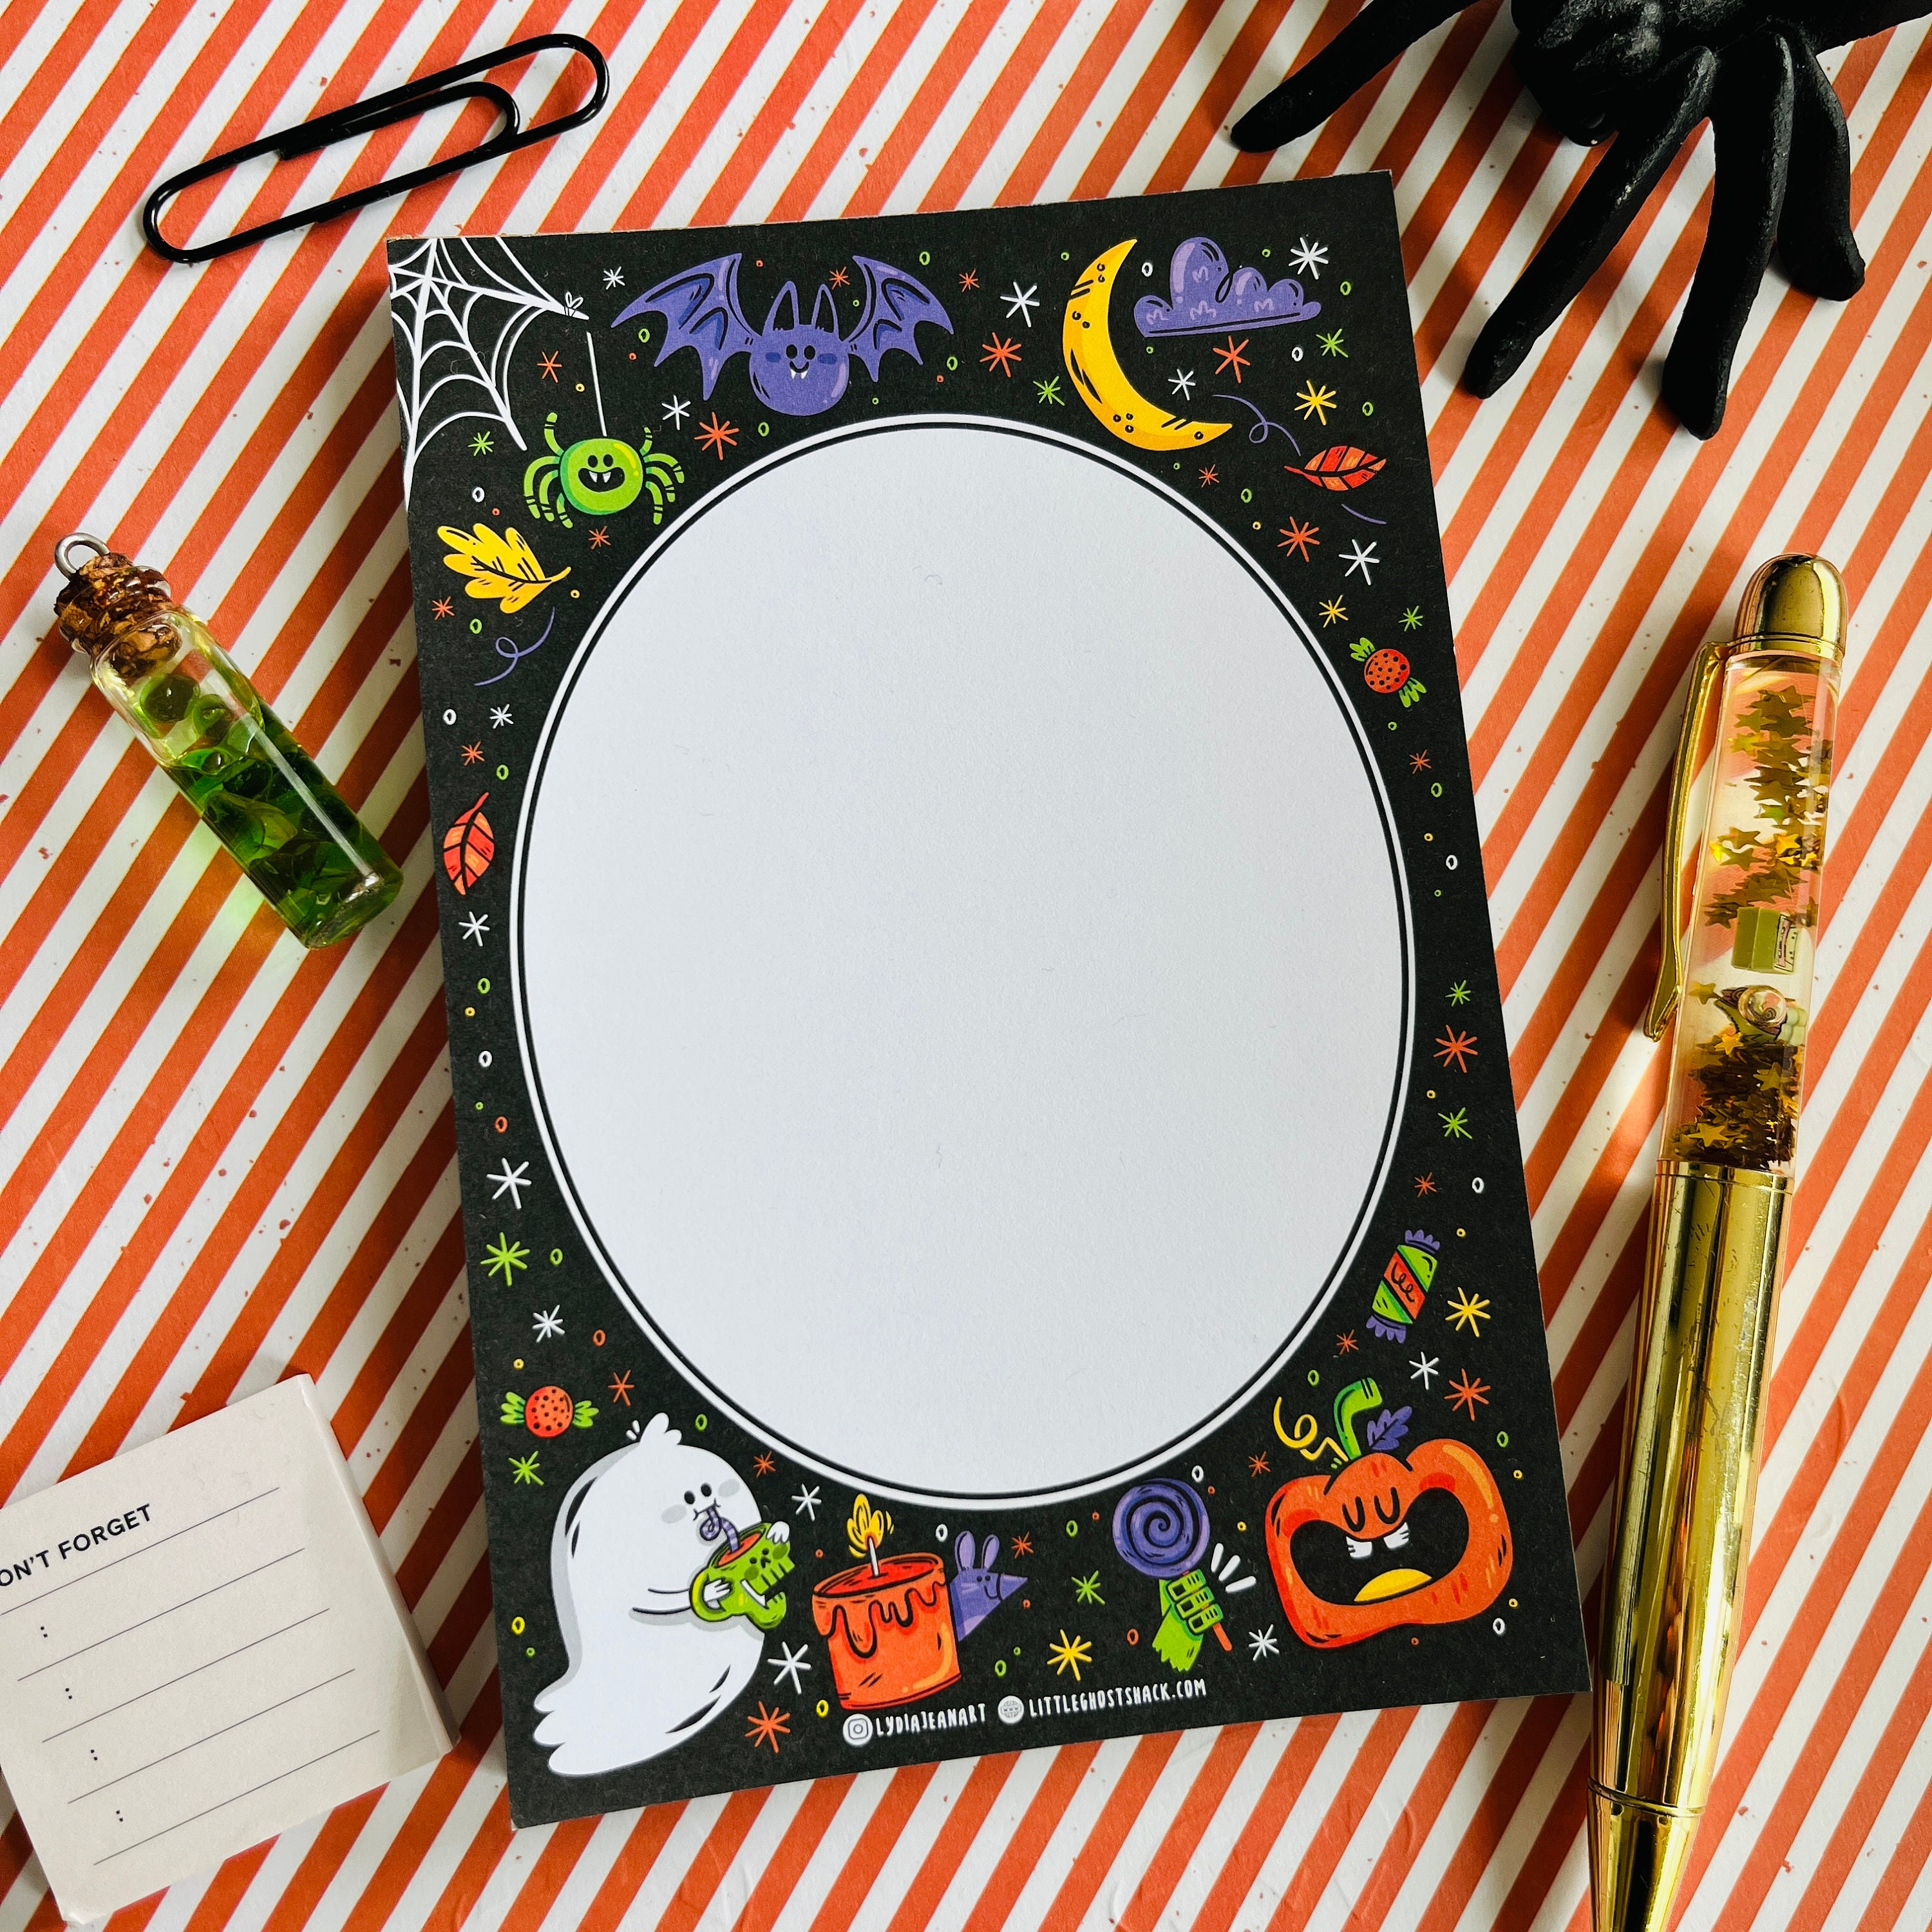 Cute Notepads, Notepads Cute, Lined Notepads, Handmade Notepads, Small  Notepads, Notepads for Teachers, to Do Notepads, Halloween Stationery 